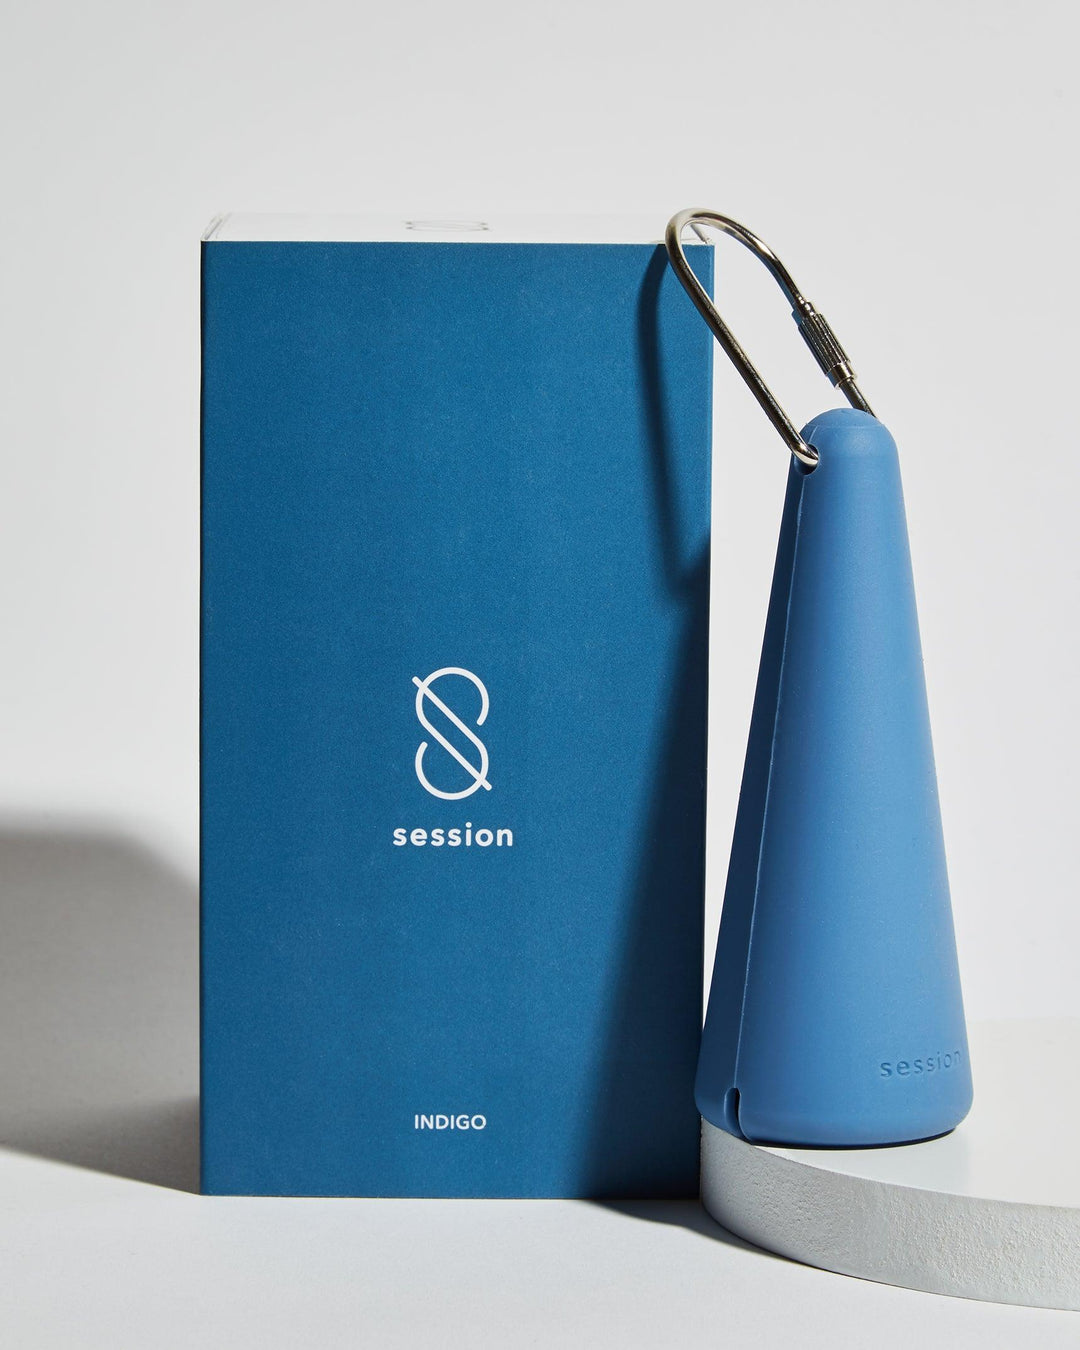 session goods herb pipe with silicone sleeve and packaging in indigo blue